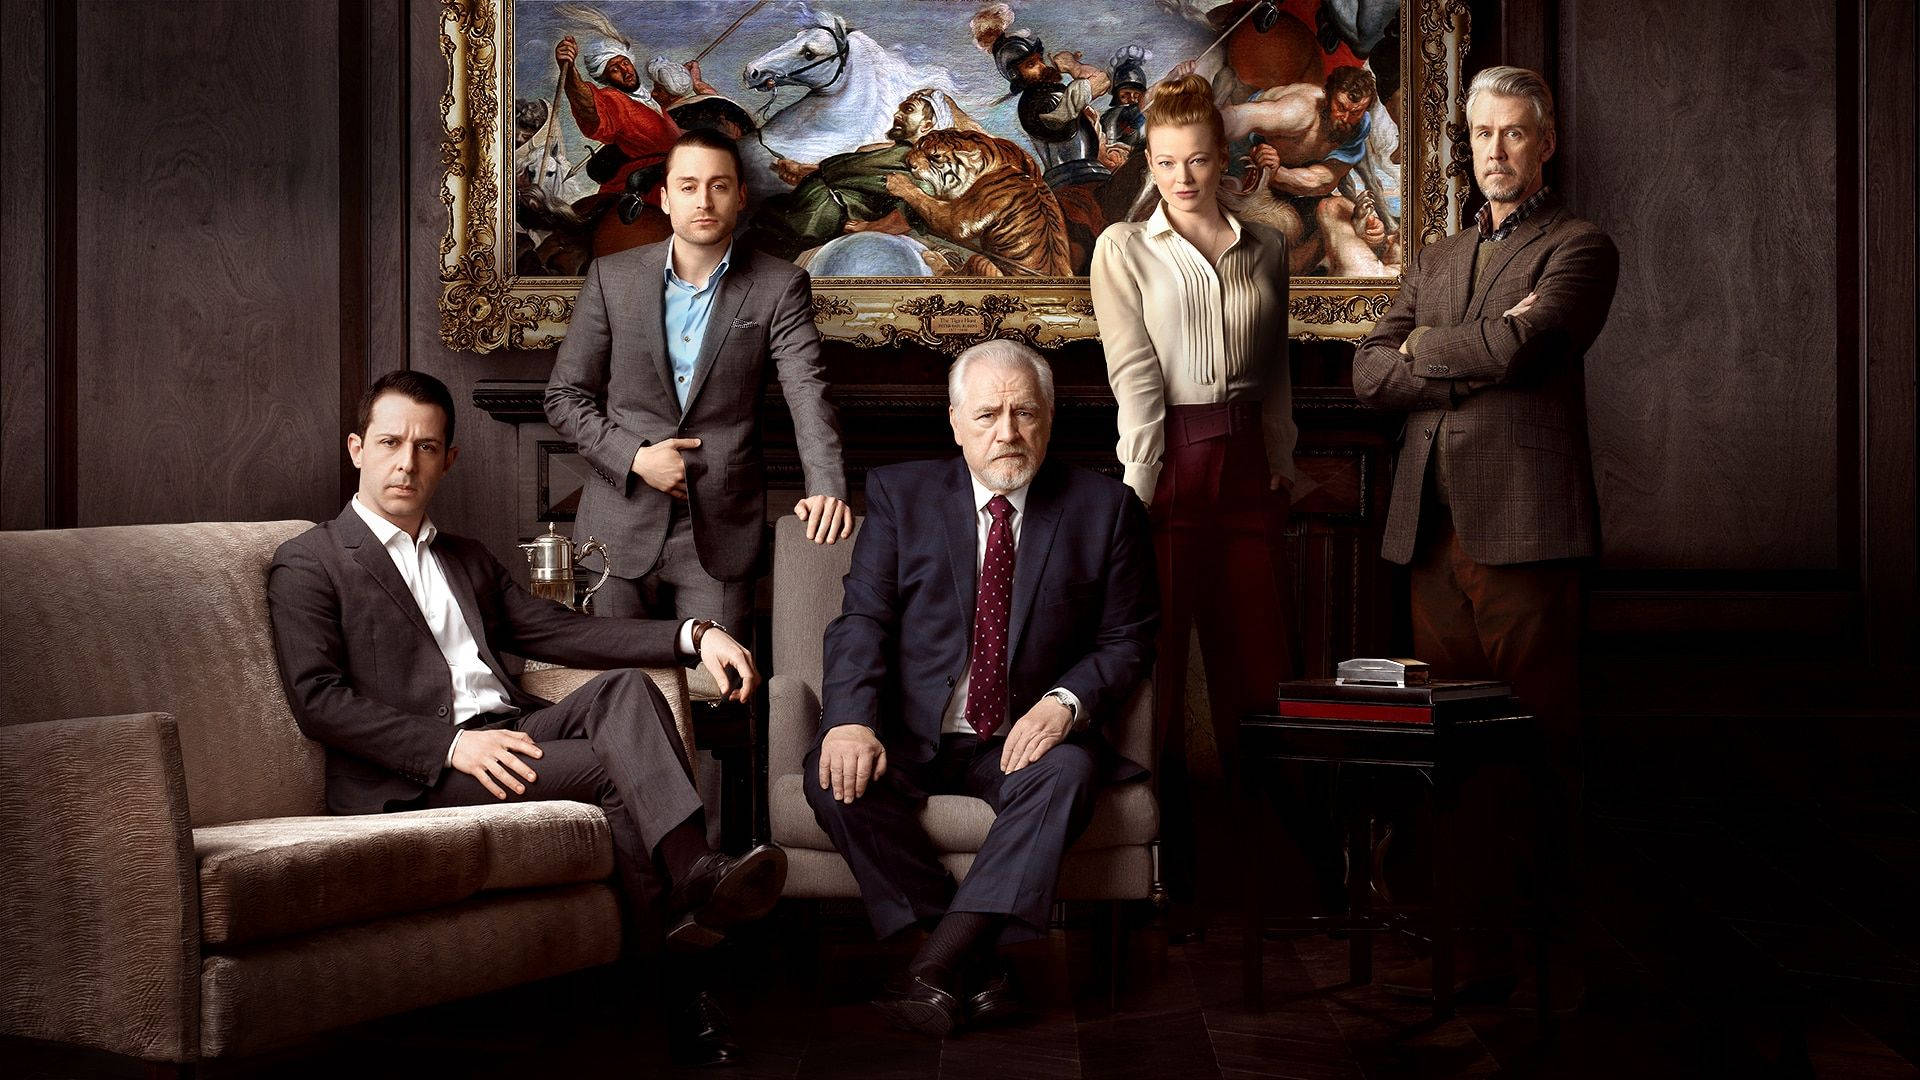 Roy Family Gathering In Fancy Living Room In Hbo's Succession Background